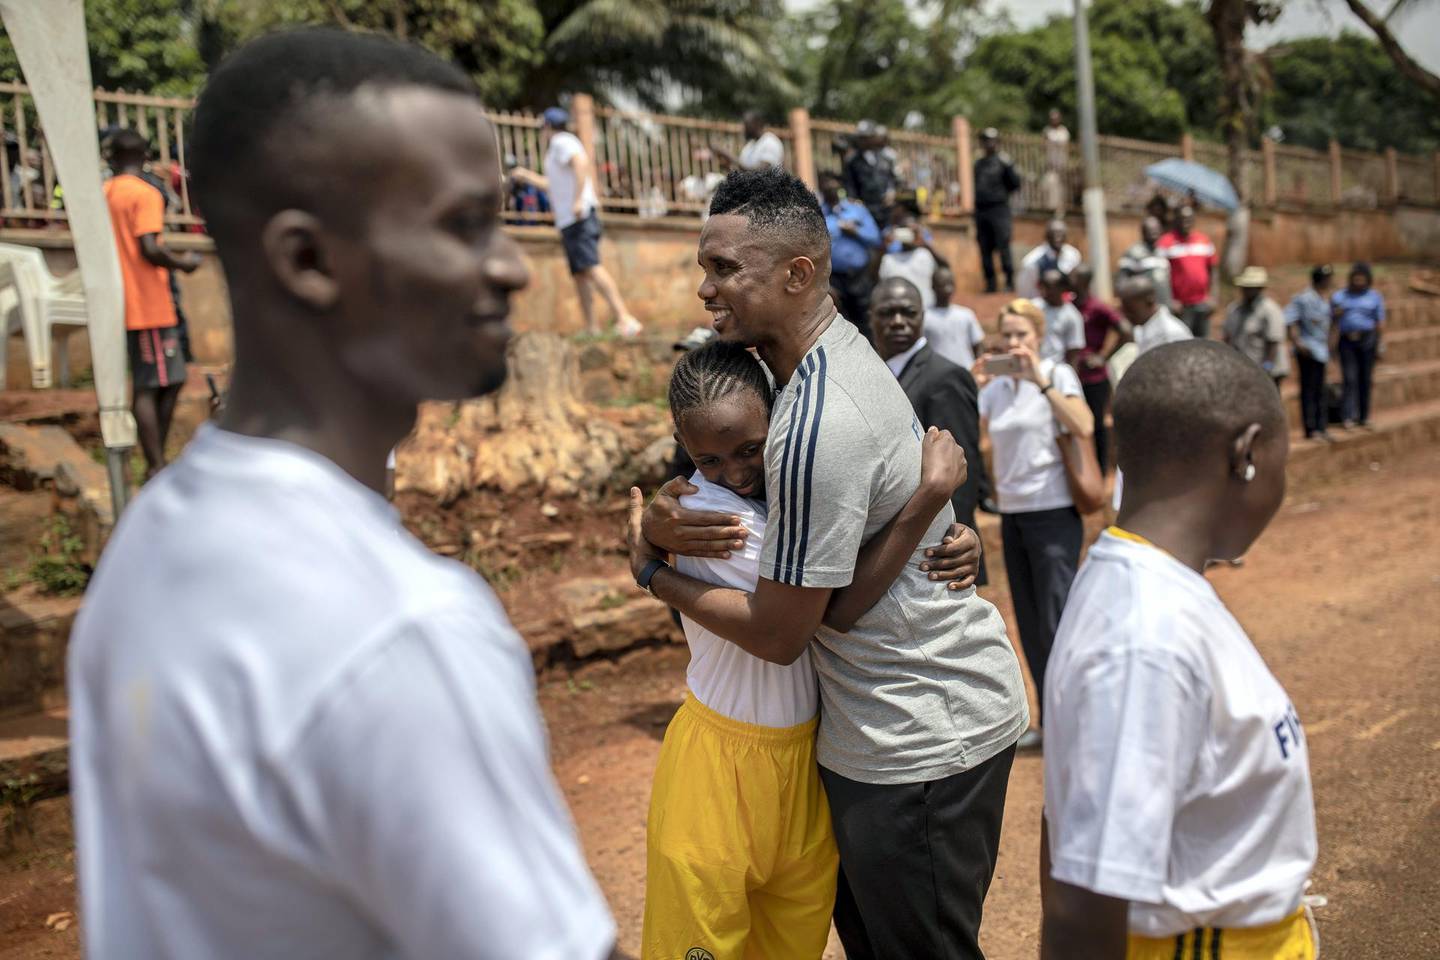 YAOUNDE, CAMEROON - MARCH 18: FIFA Legend Samuel Eto‚Äôo hugs a child during his visit in school, event organized by FIFA Foundation-supported NGO, Sport and Cooperation Network, on March 18, 2019 in Yaounde, Cameroon. (Photo by Maja Hitij - FIFA/FIFA via Getty Images)